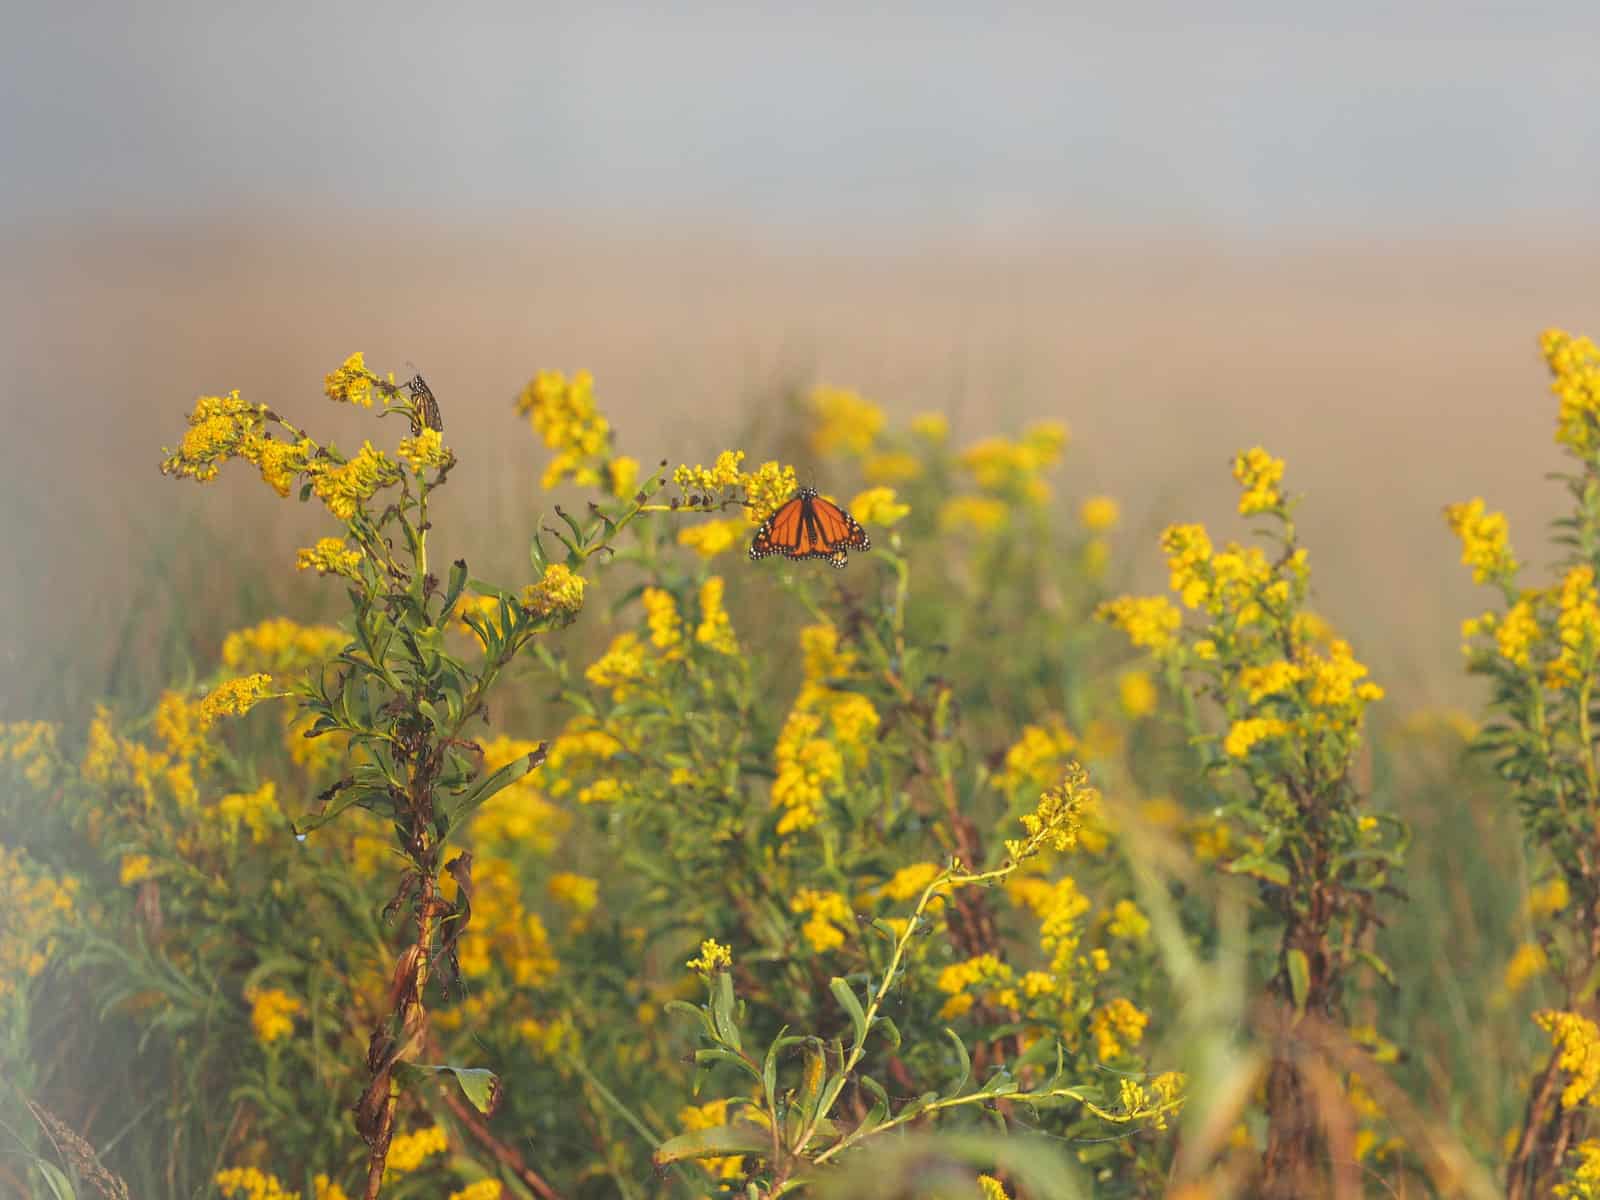 A monarch butterfly perched on a yellow wildflower in a foggy field.